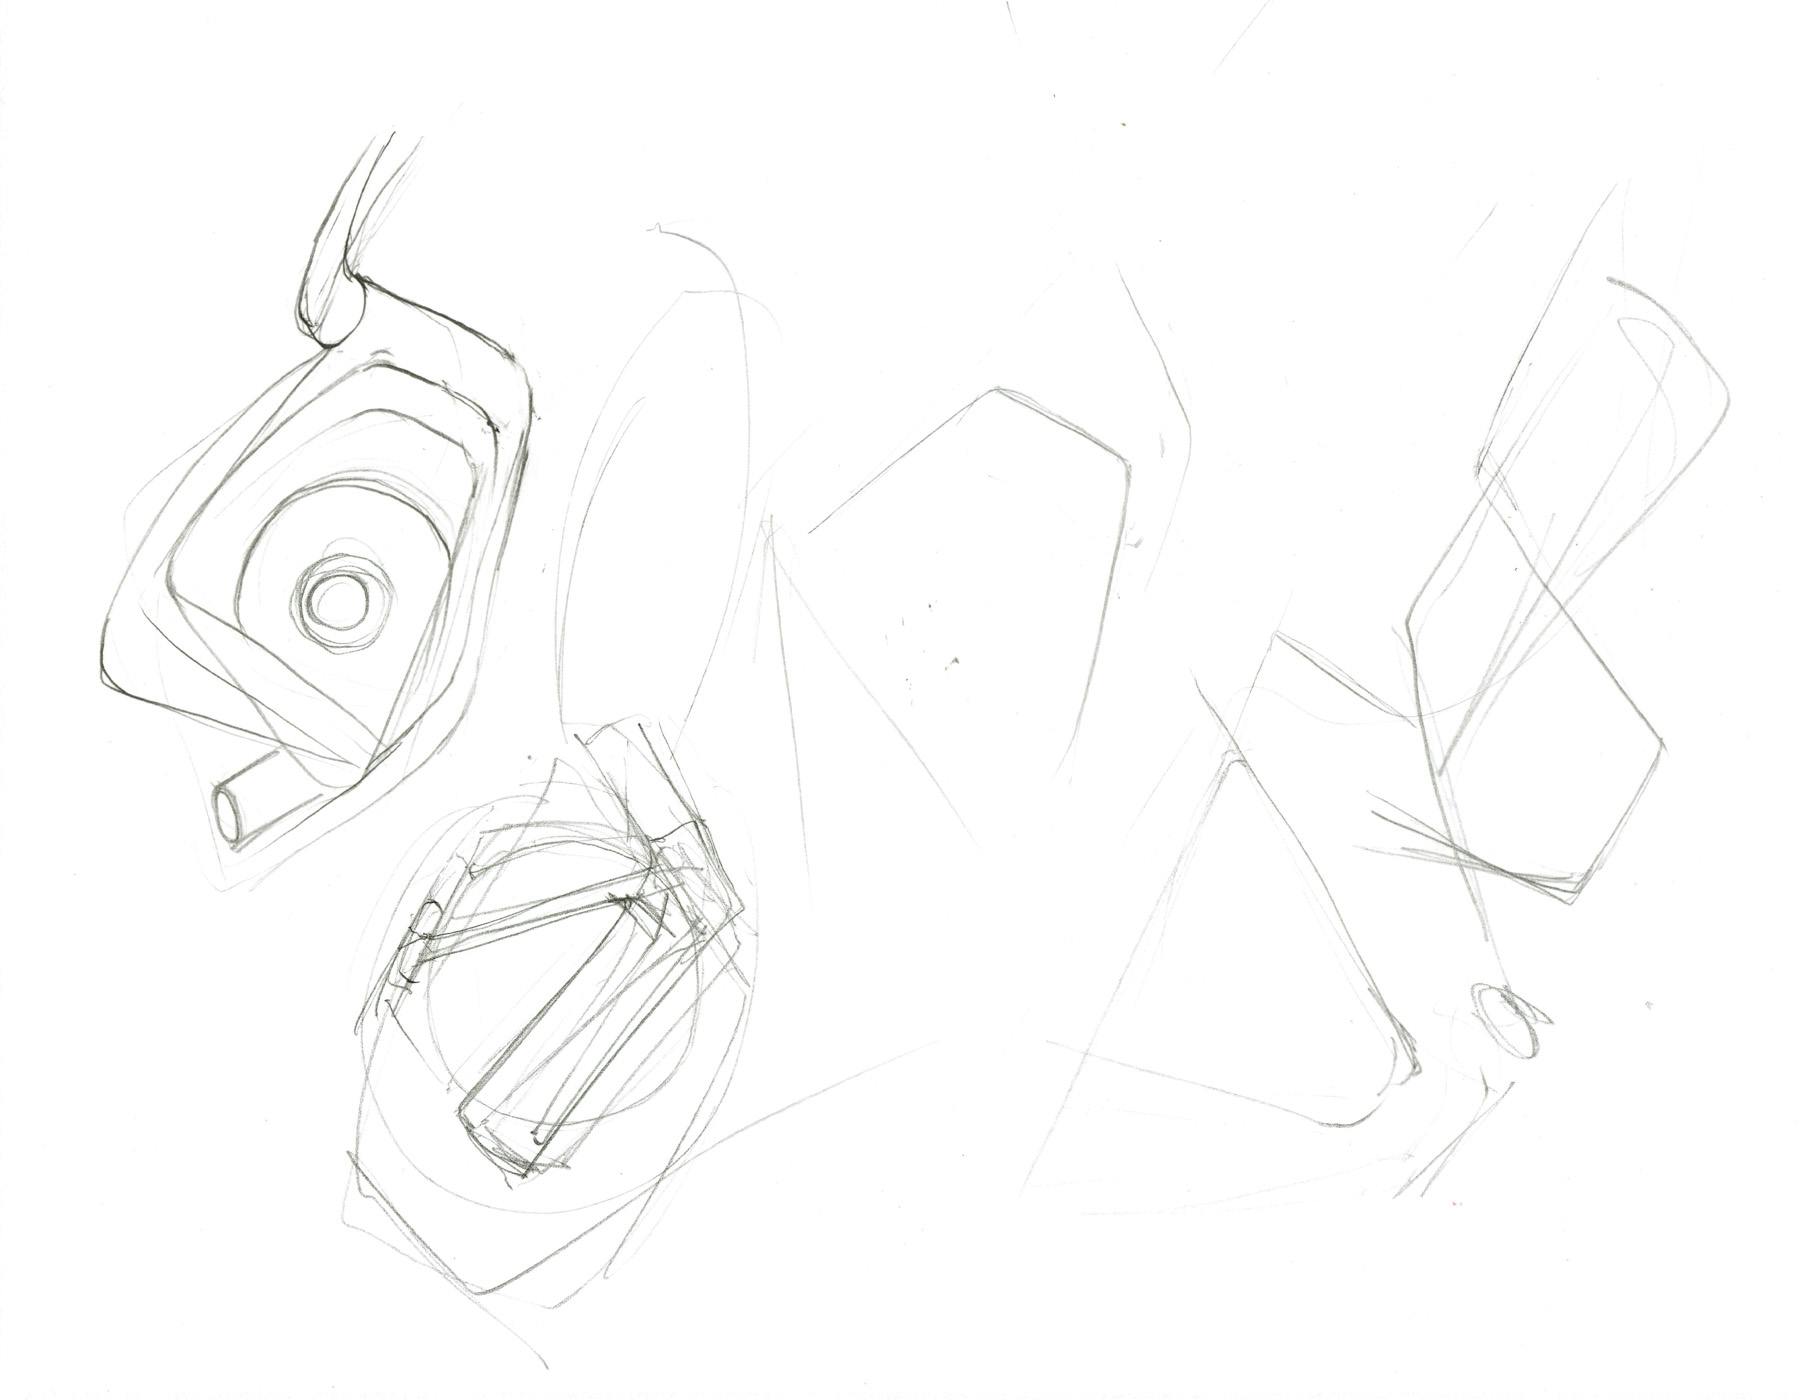 Rough sketches of more angular headphones with sharper edges.